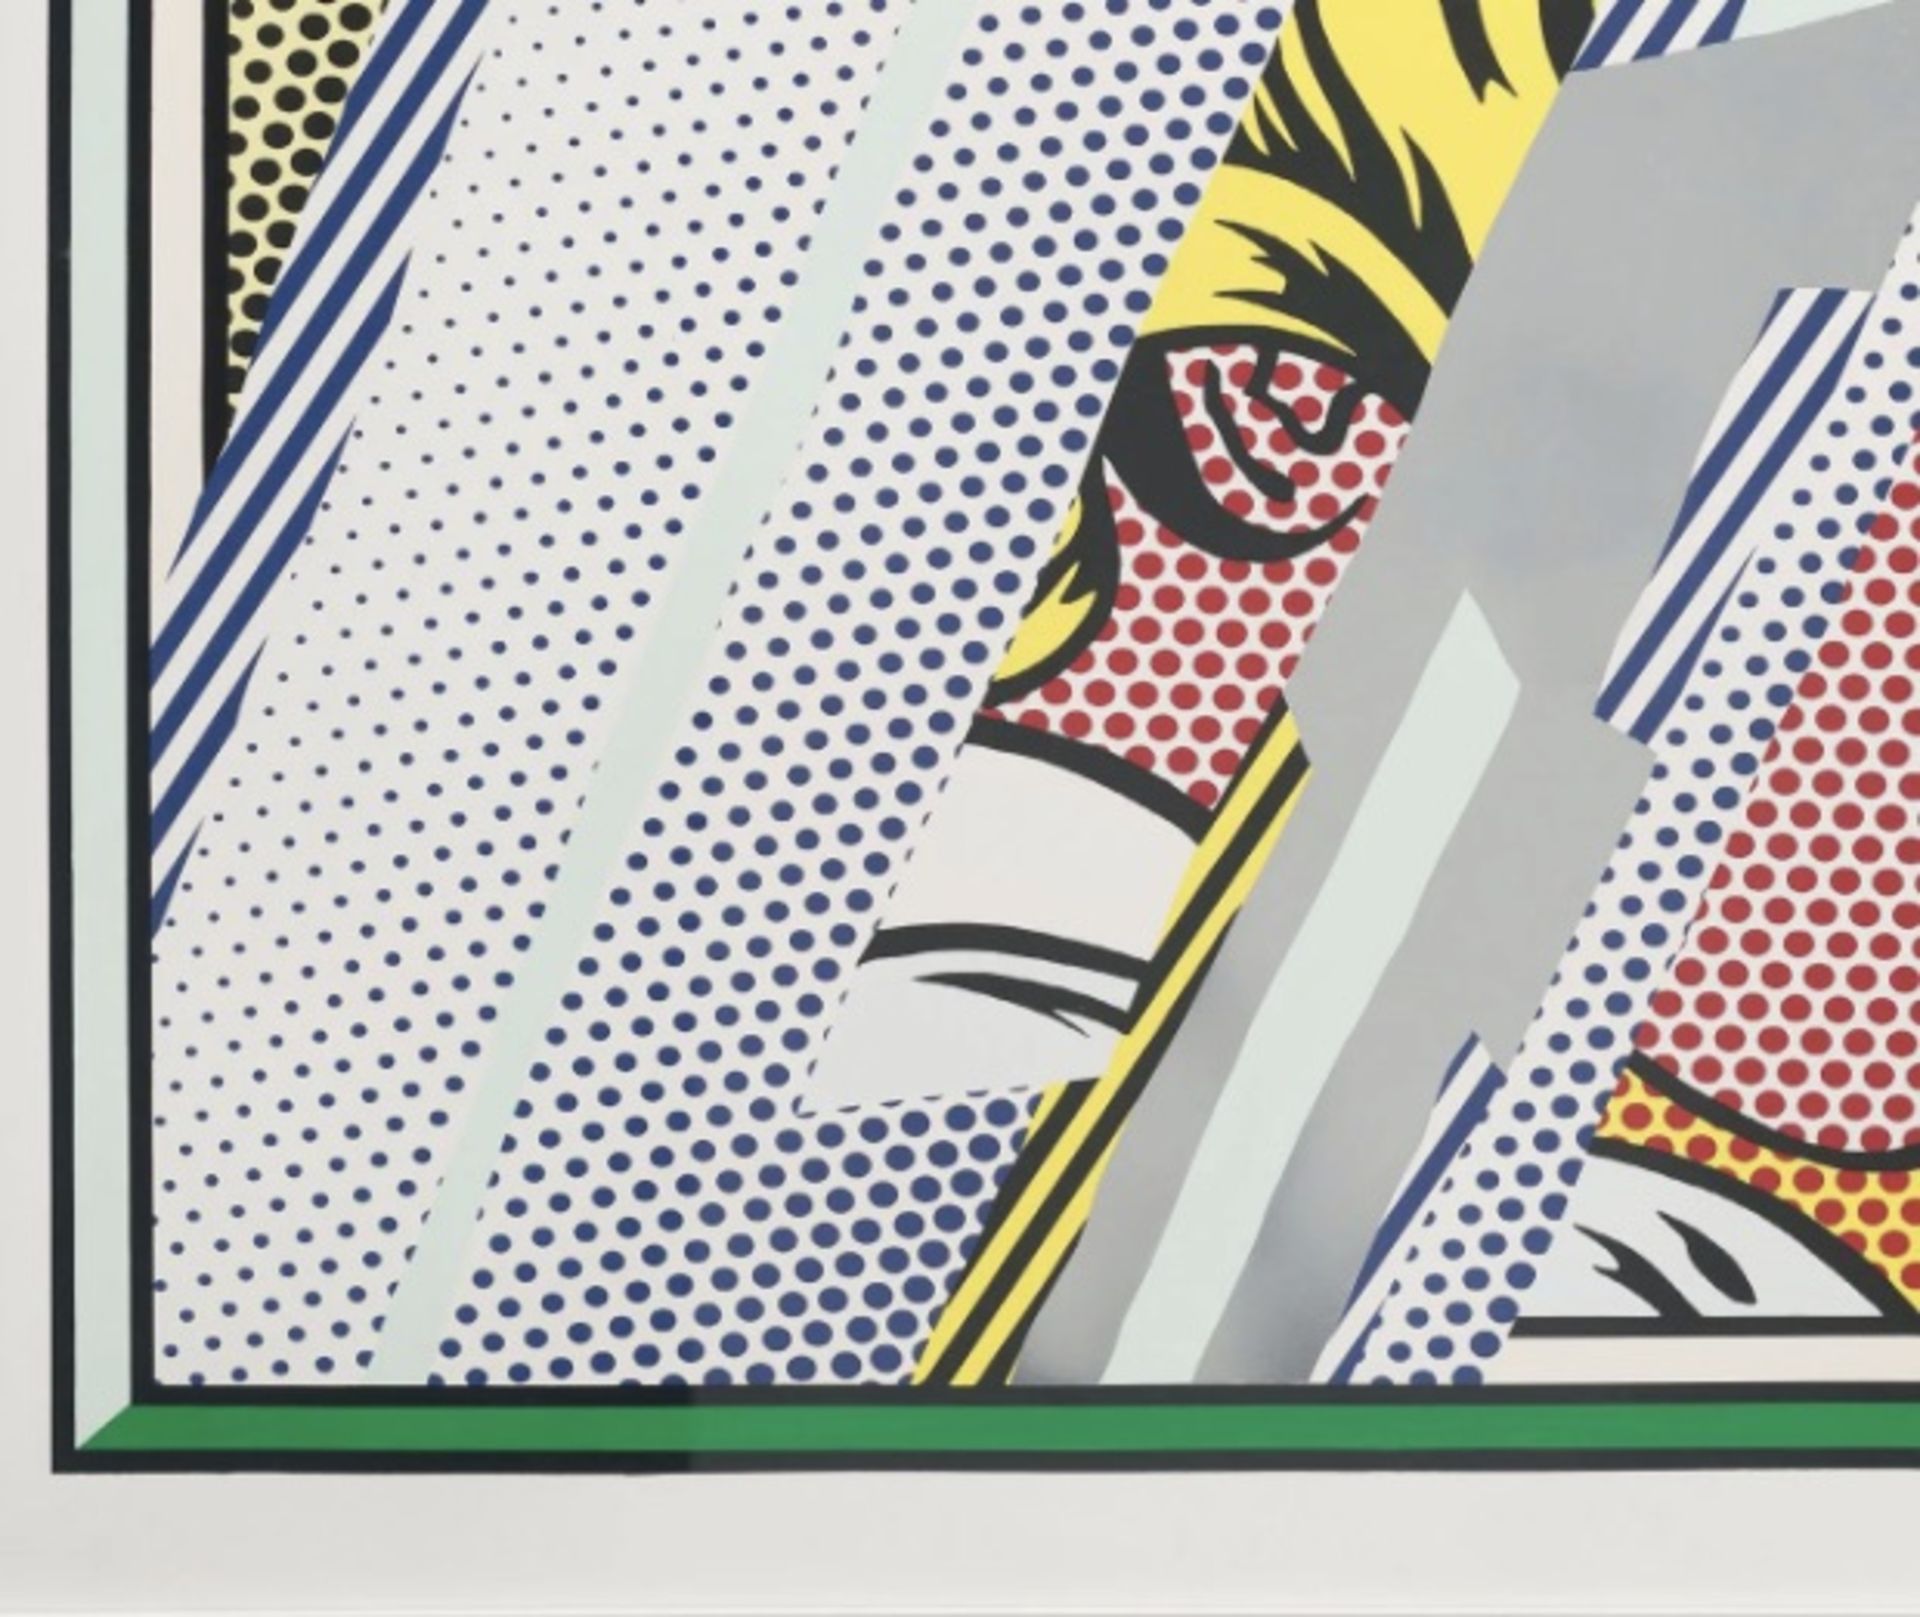 Roy Lichtenstein "Reflections on Girl, 1990" Plate Signed Offset Lithograph - Image 5 of 5